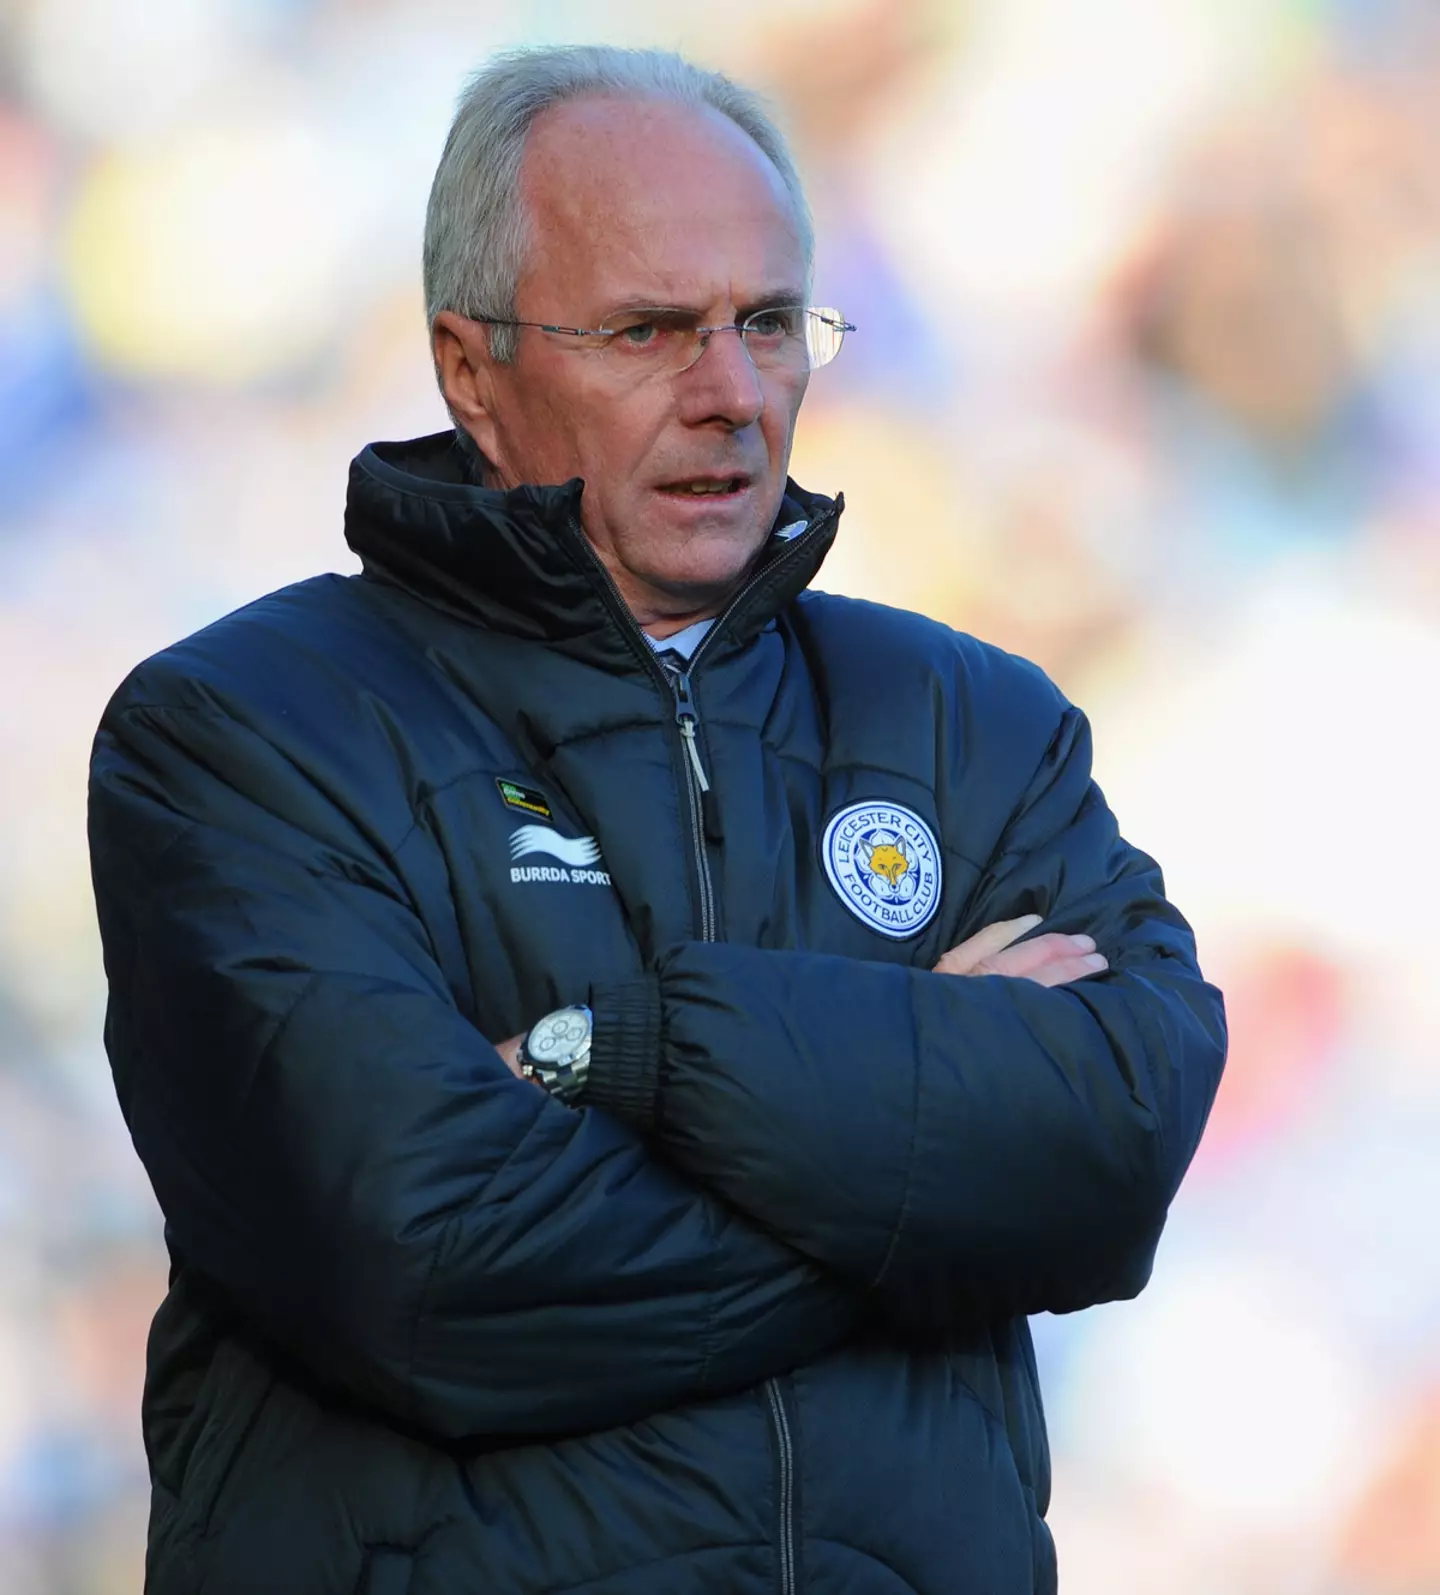 Sven-Göran Eriksson has revealed he has been diagnosed with terminal cancer.